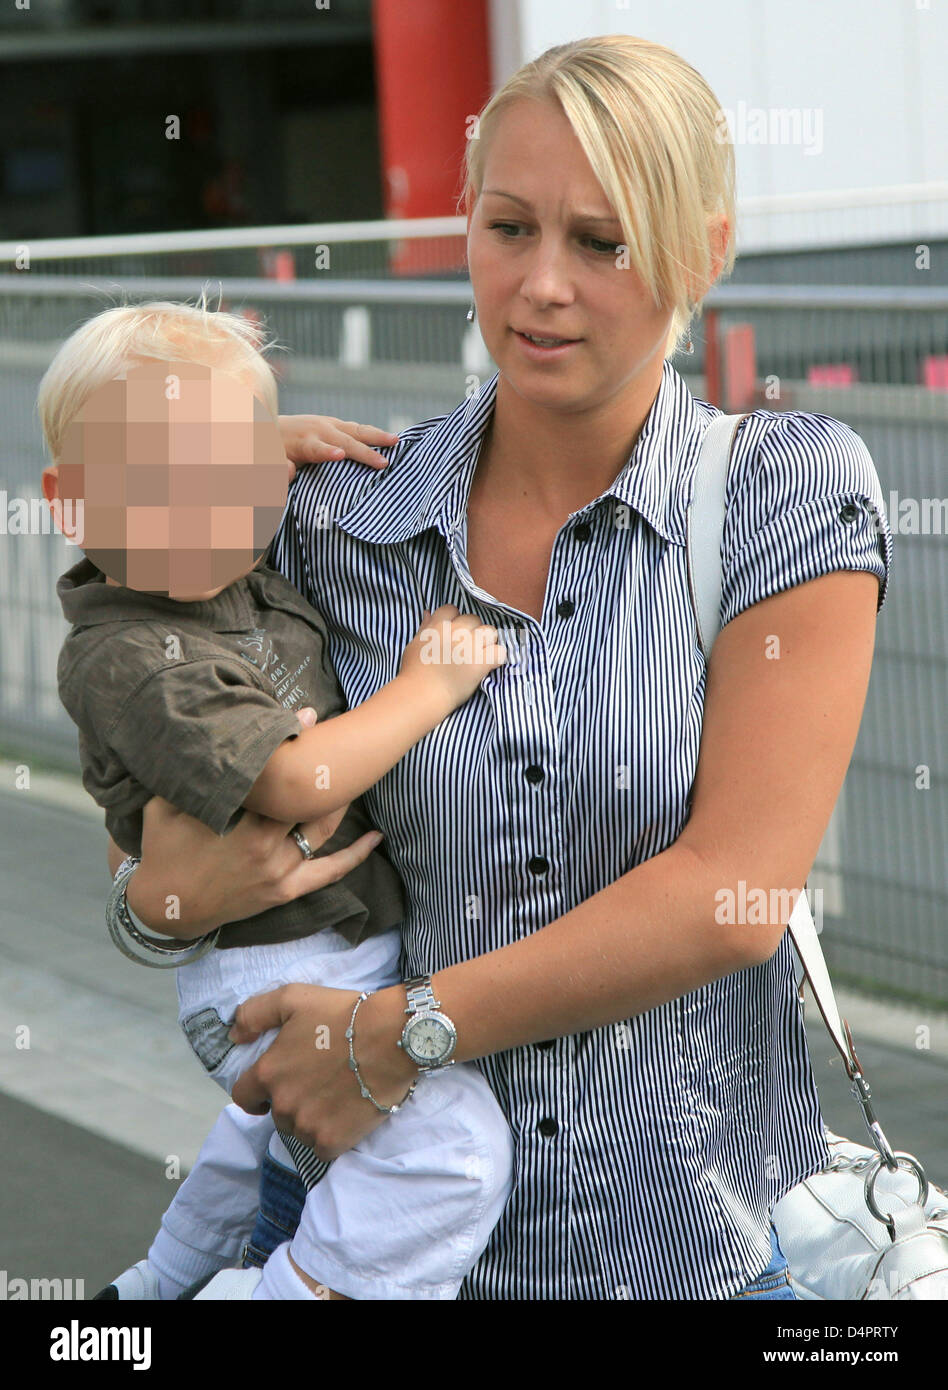 Bernadien Eillert, wife of Dutch midfielder Arjen Robben, arrives at the premises of German Bundesliga club FC Bayern Munich in Munich, Germany, 28 August 2009. Bayern Munich signed Robben from Spanish Primera Division side Real Madrid at estimated 25 million euro, Robben penned a four-years contract with Munich. Photo: Lukas Barth Stock Photo